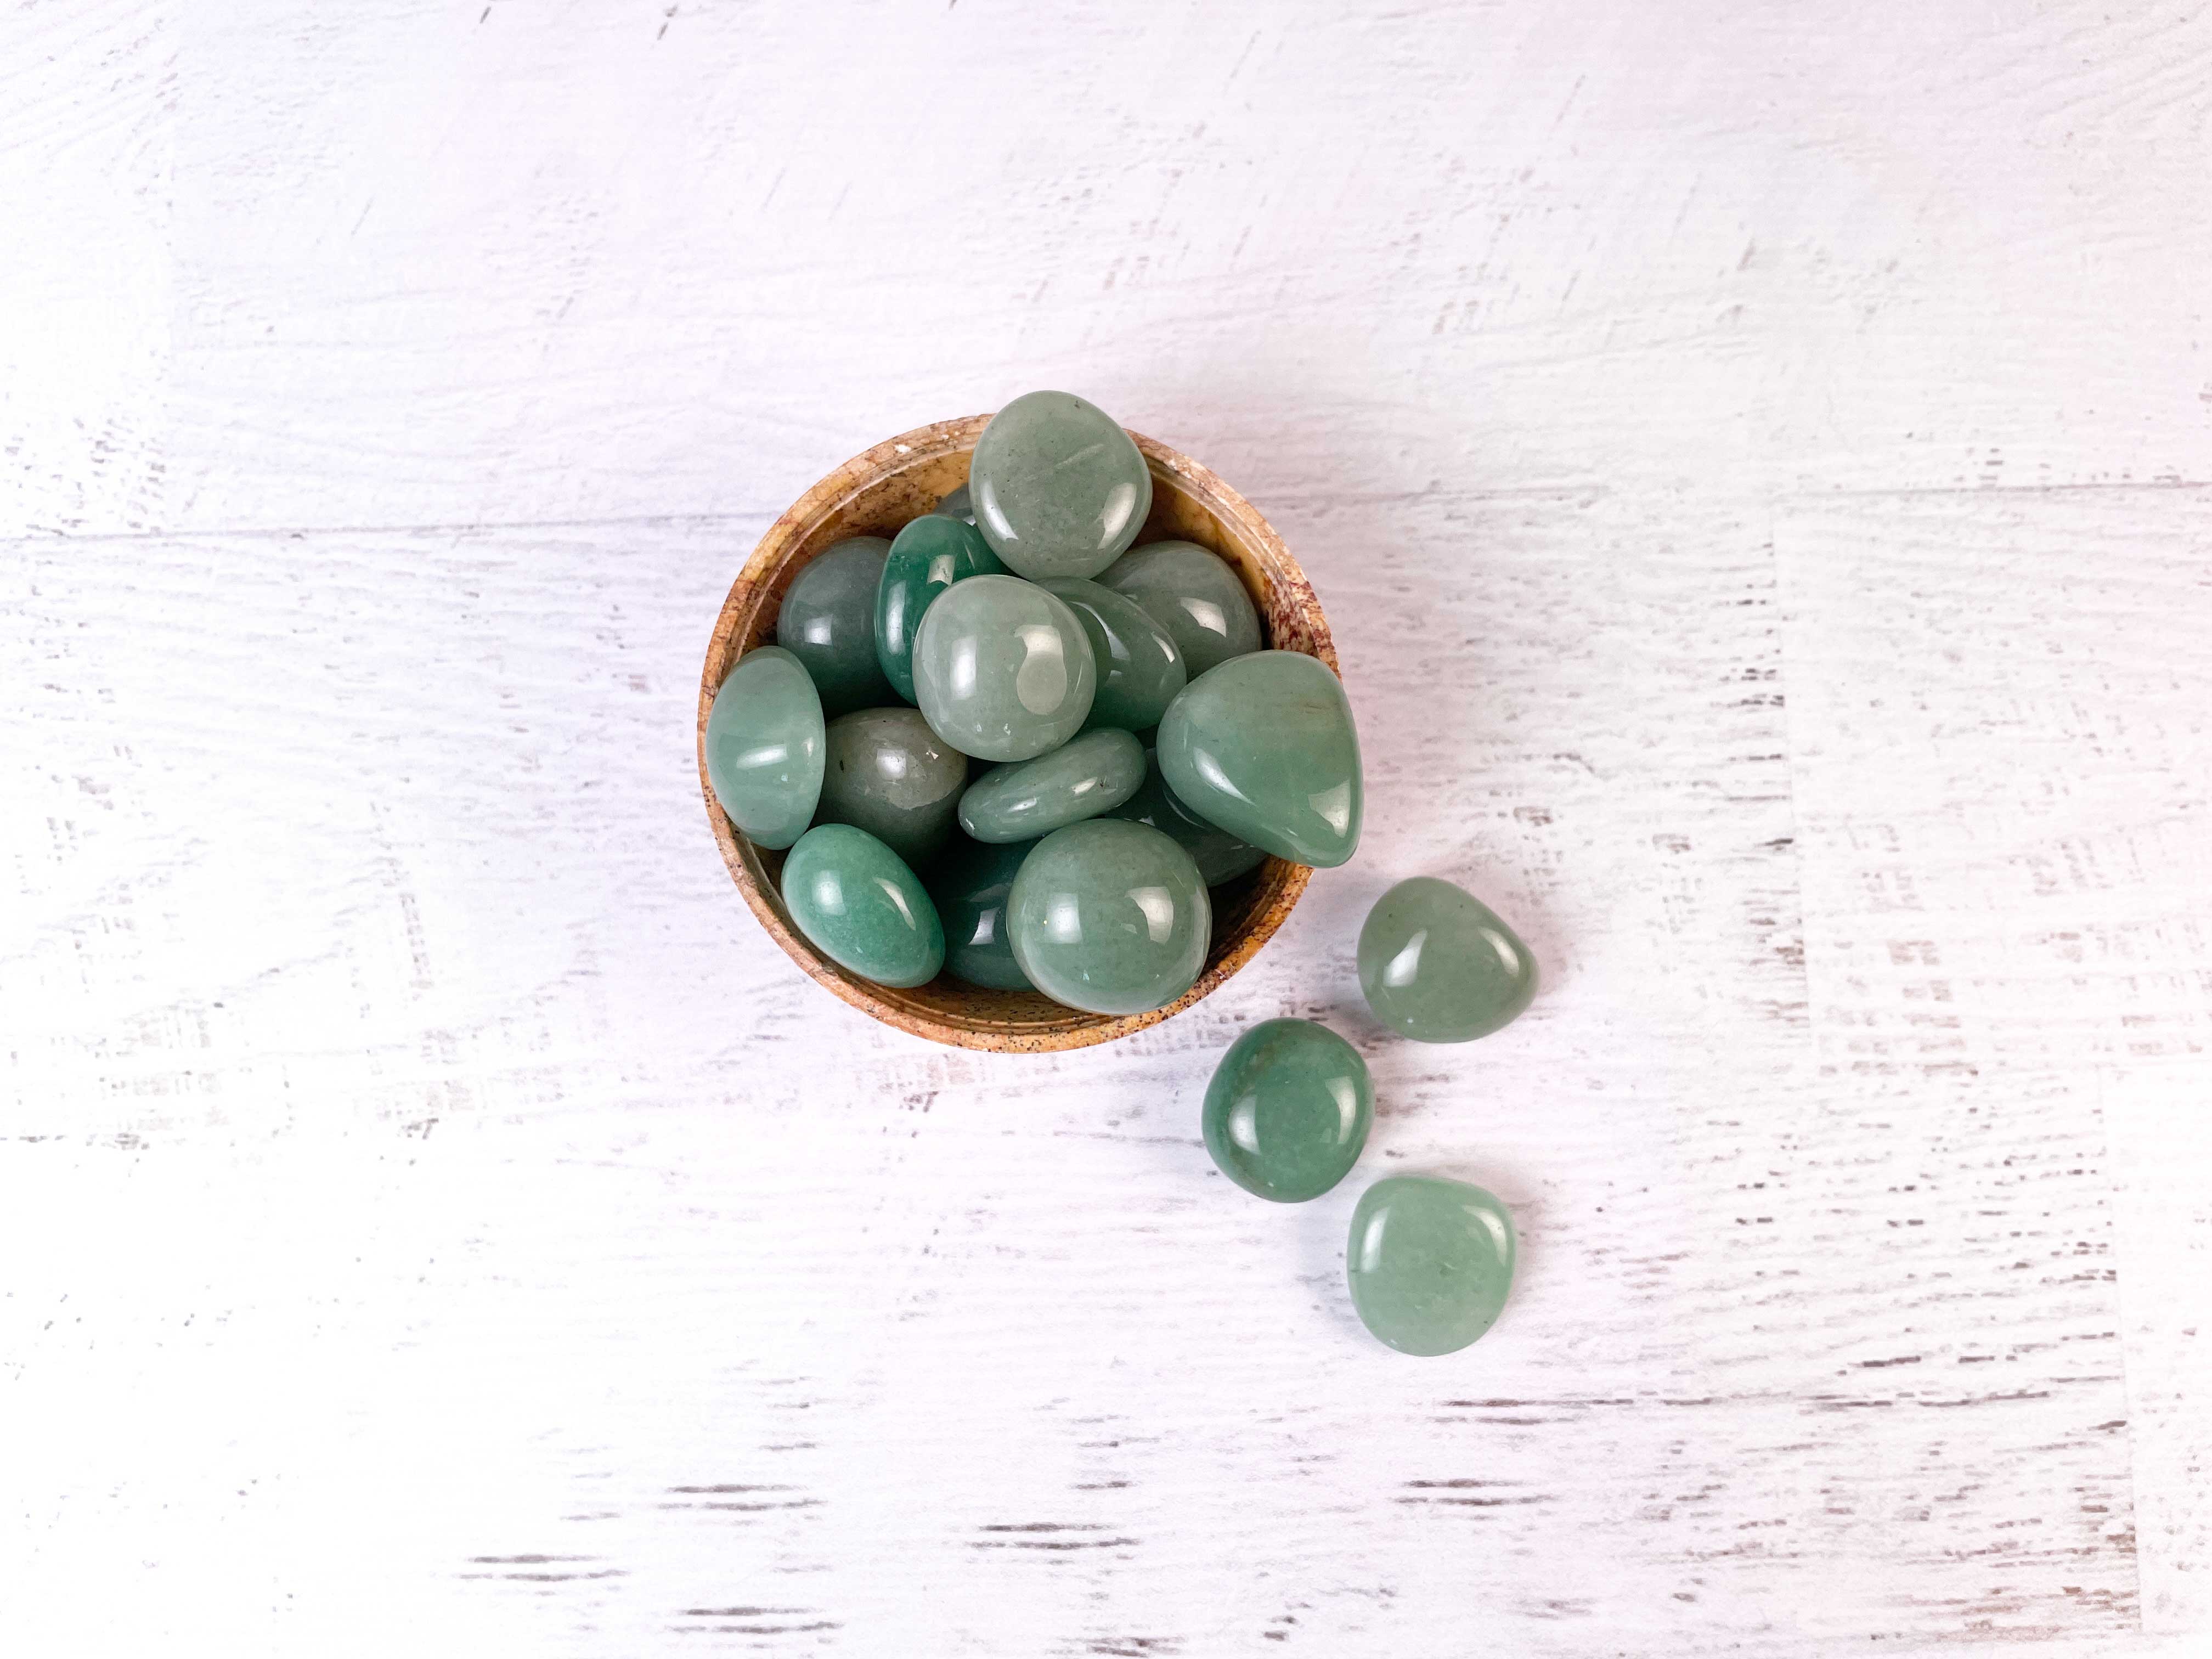 Buy Online Latest and Unique Tumbled Green Aventurine- Abundance, Prosperity, Luck, Wealth | Shop Best Spiritual Items - The Mystical Ritual